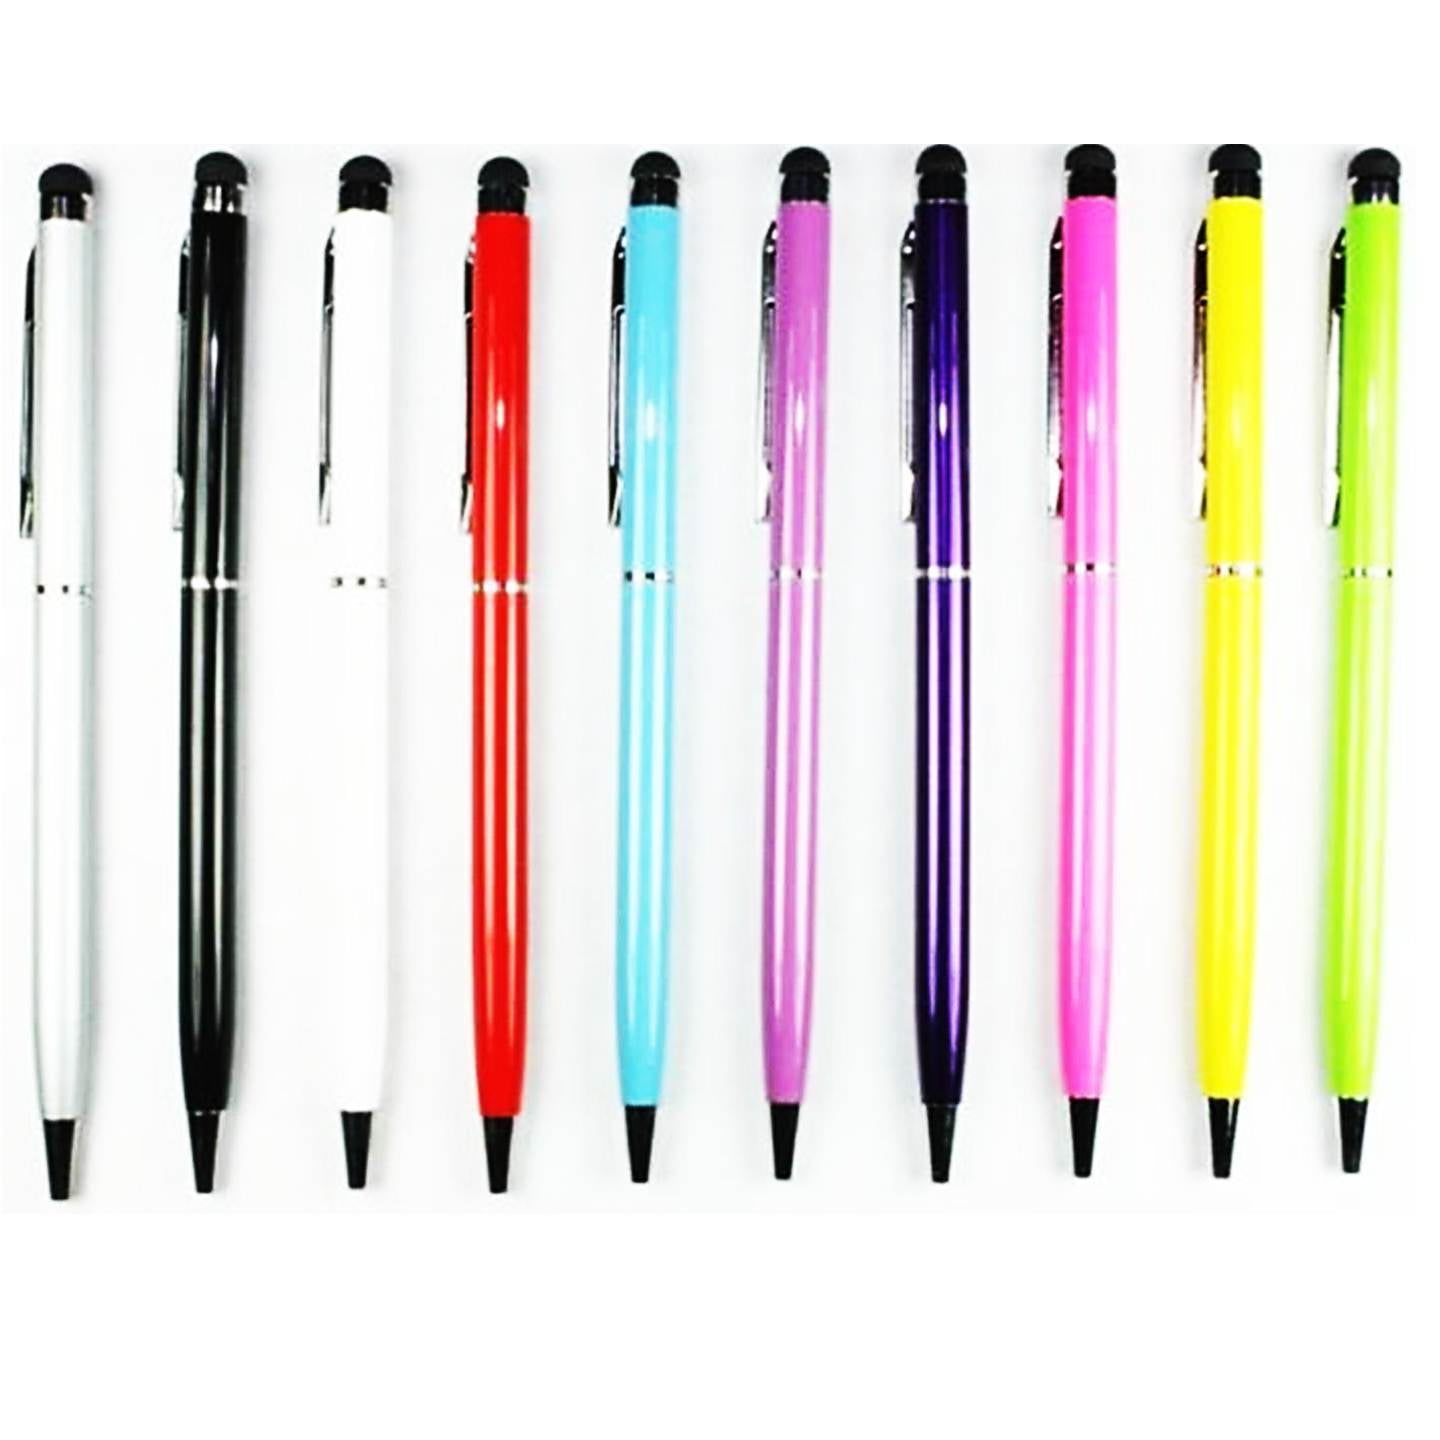 1/3/5PCS 2in1 Touch Screen Stylus Pen for iPhone iPad Smartphone Tablet 